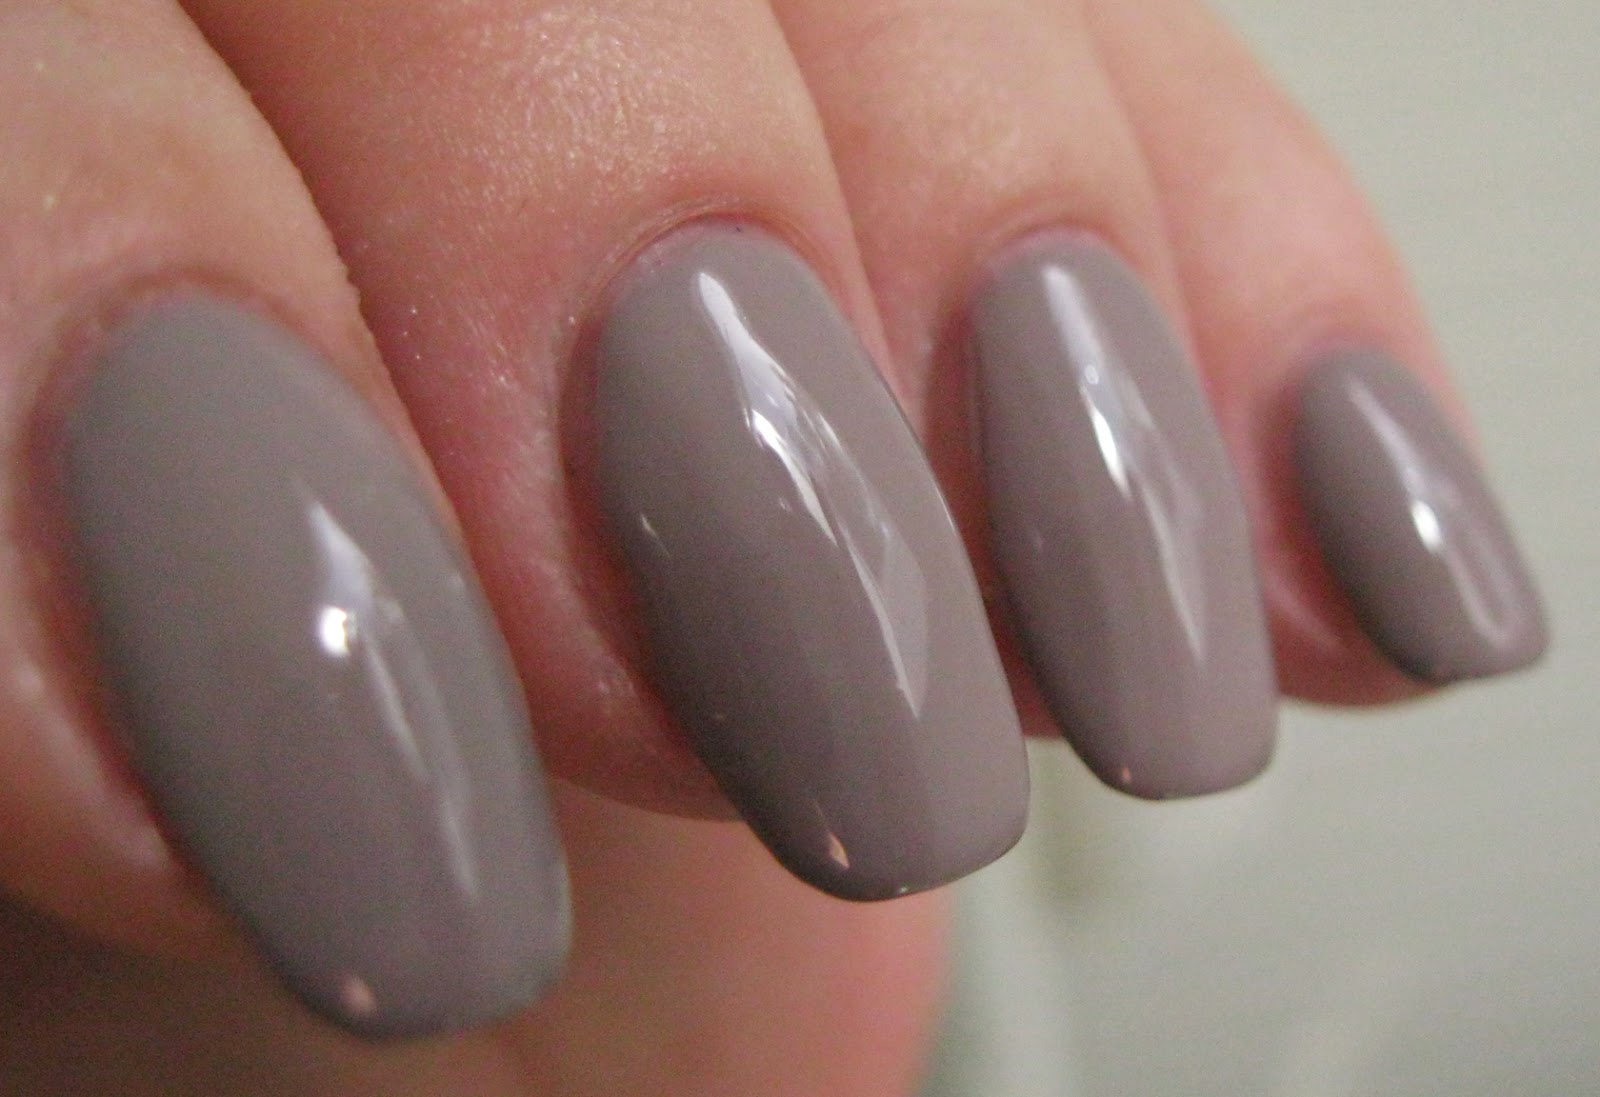 OPI Nail Lacquer in "Taupe-less Beach" - wide 1